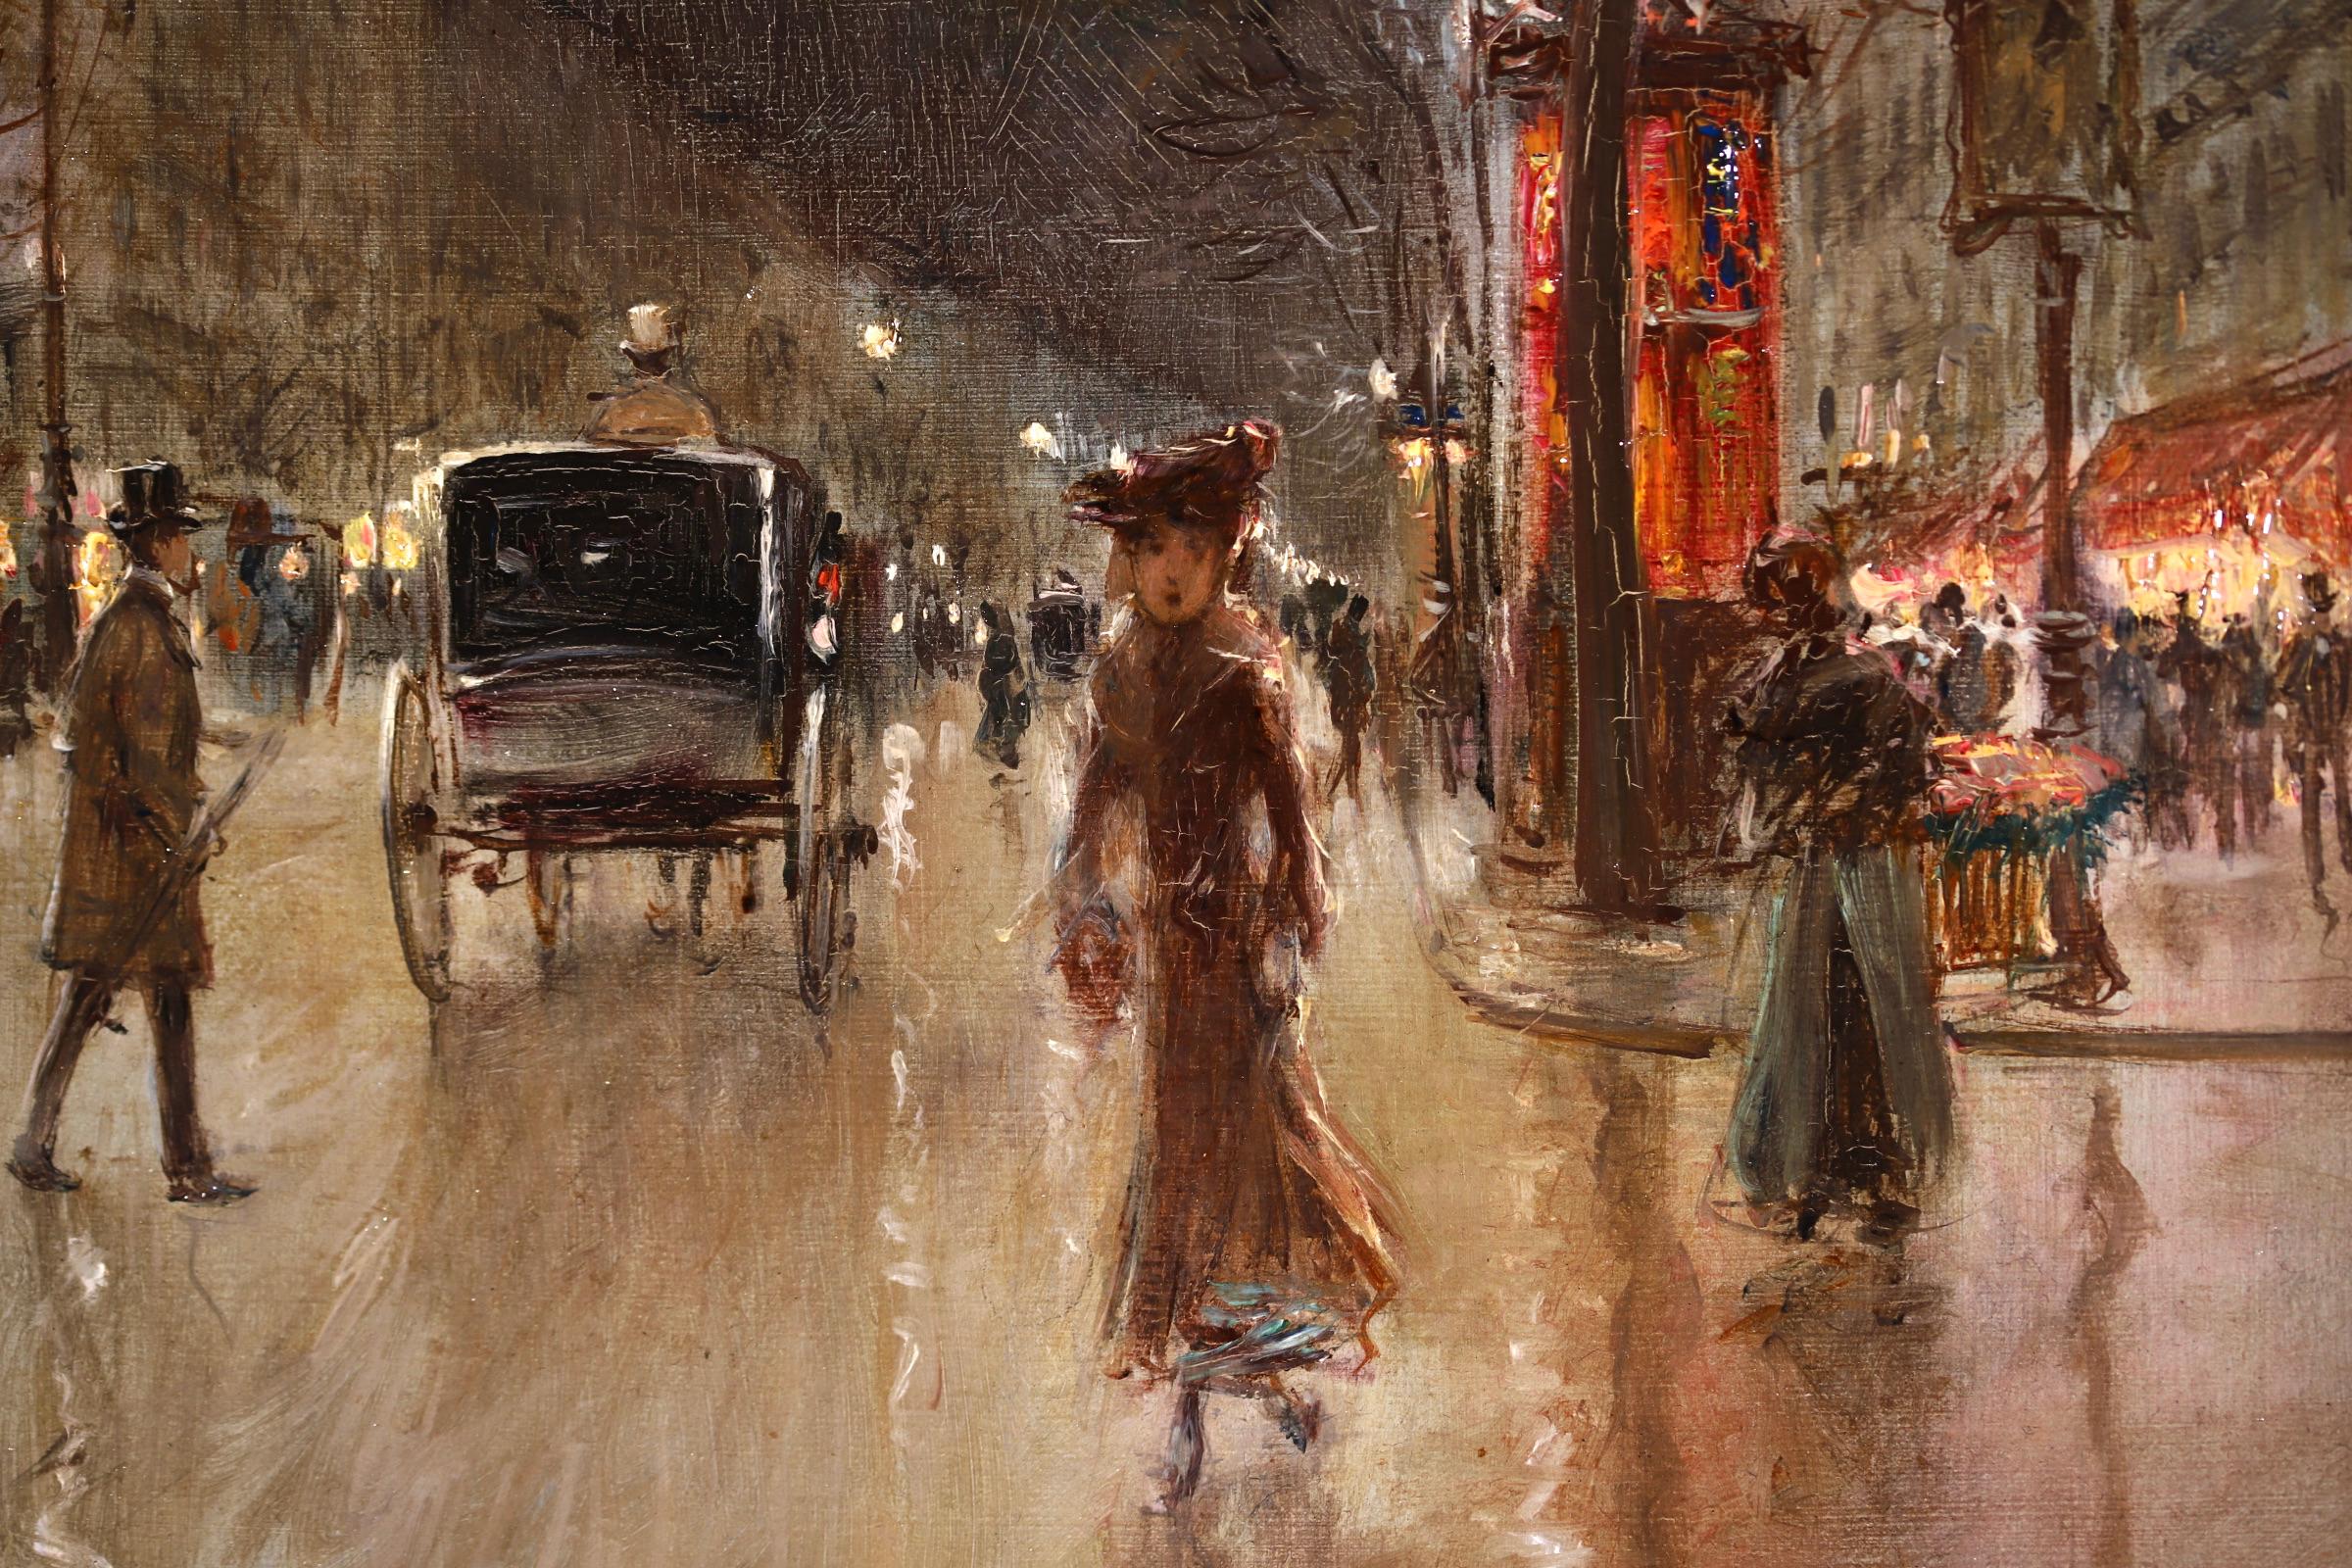 Paris-Grands Boulevards-Moonlight - 19th Century Figures in Cityscape by G Stein - Impressionist Painting by Georges Stein